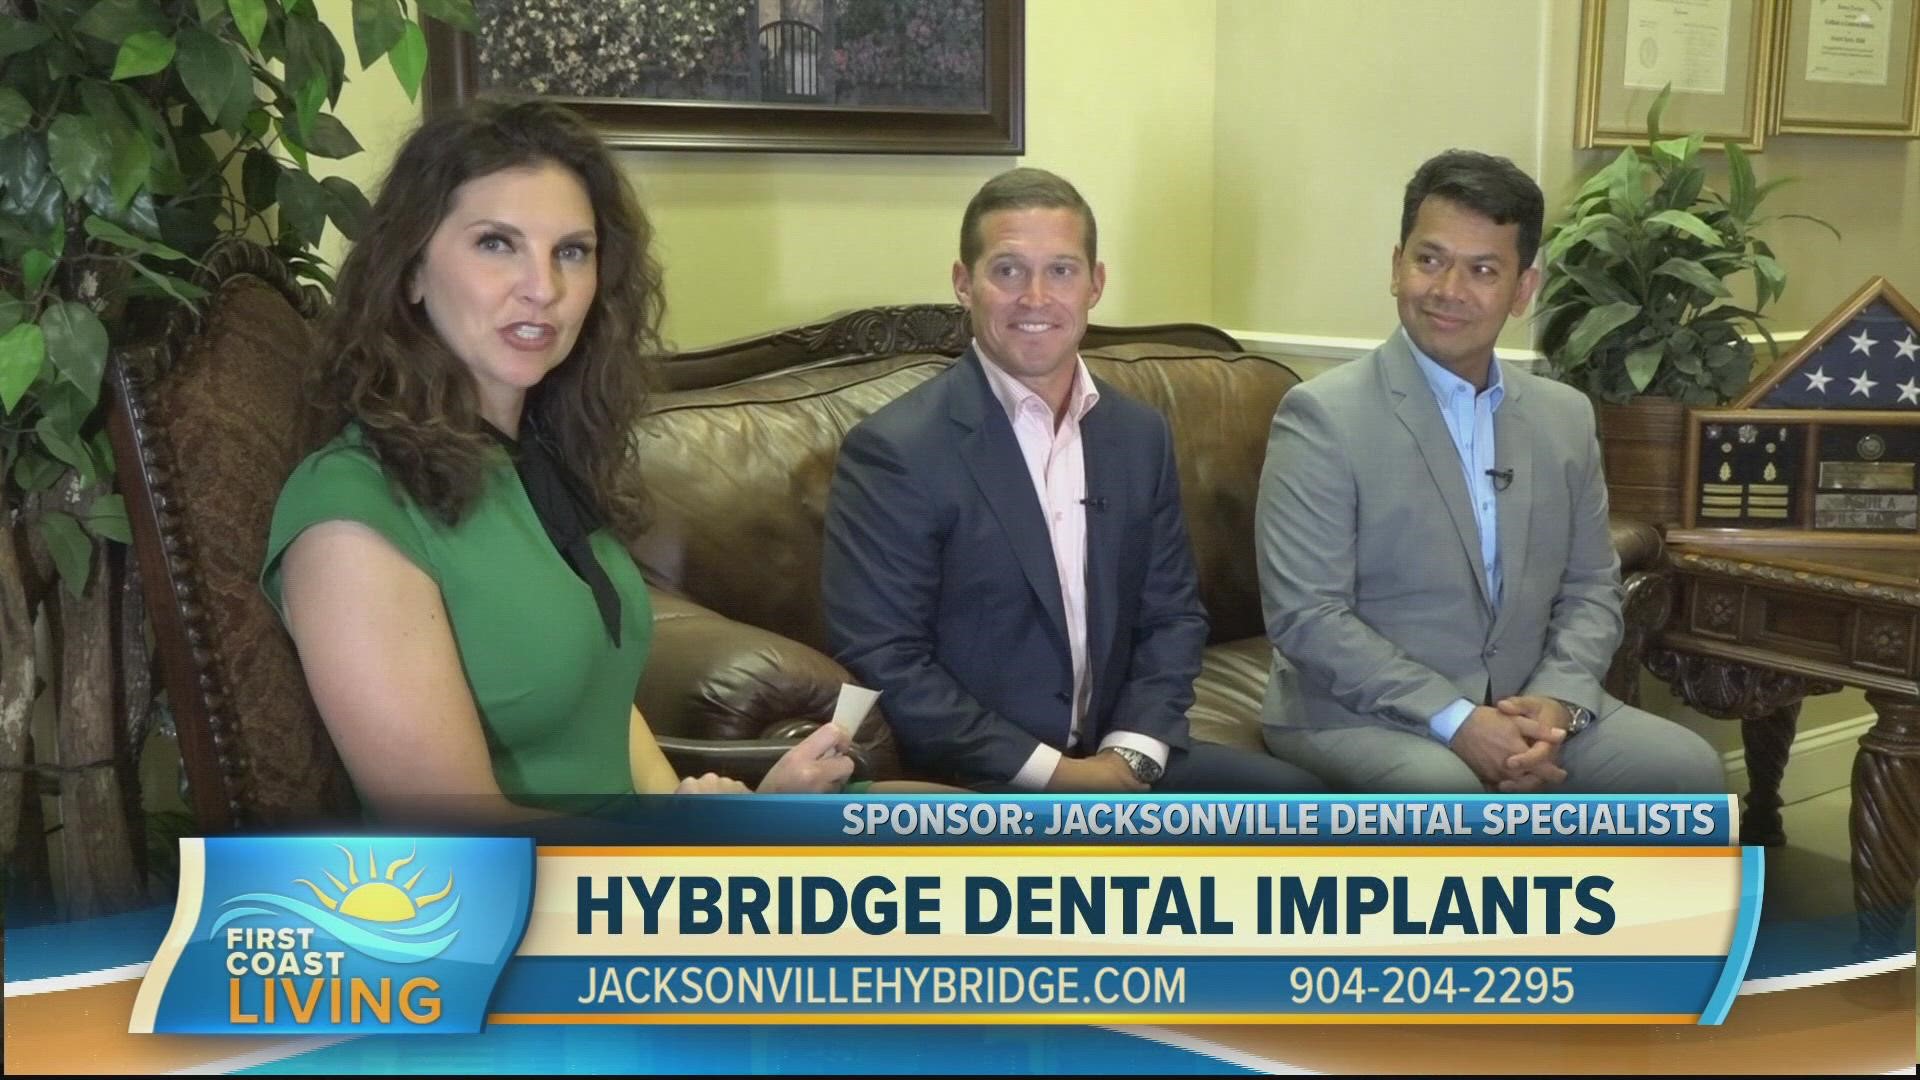 If you're interested in a full mouth dental implant, Jacksonville Dental Specialists may be able to help!